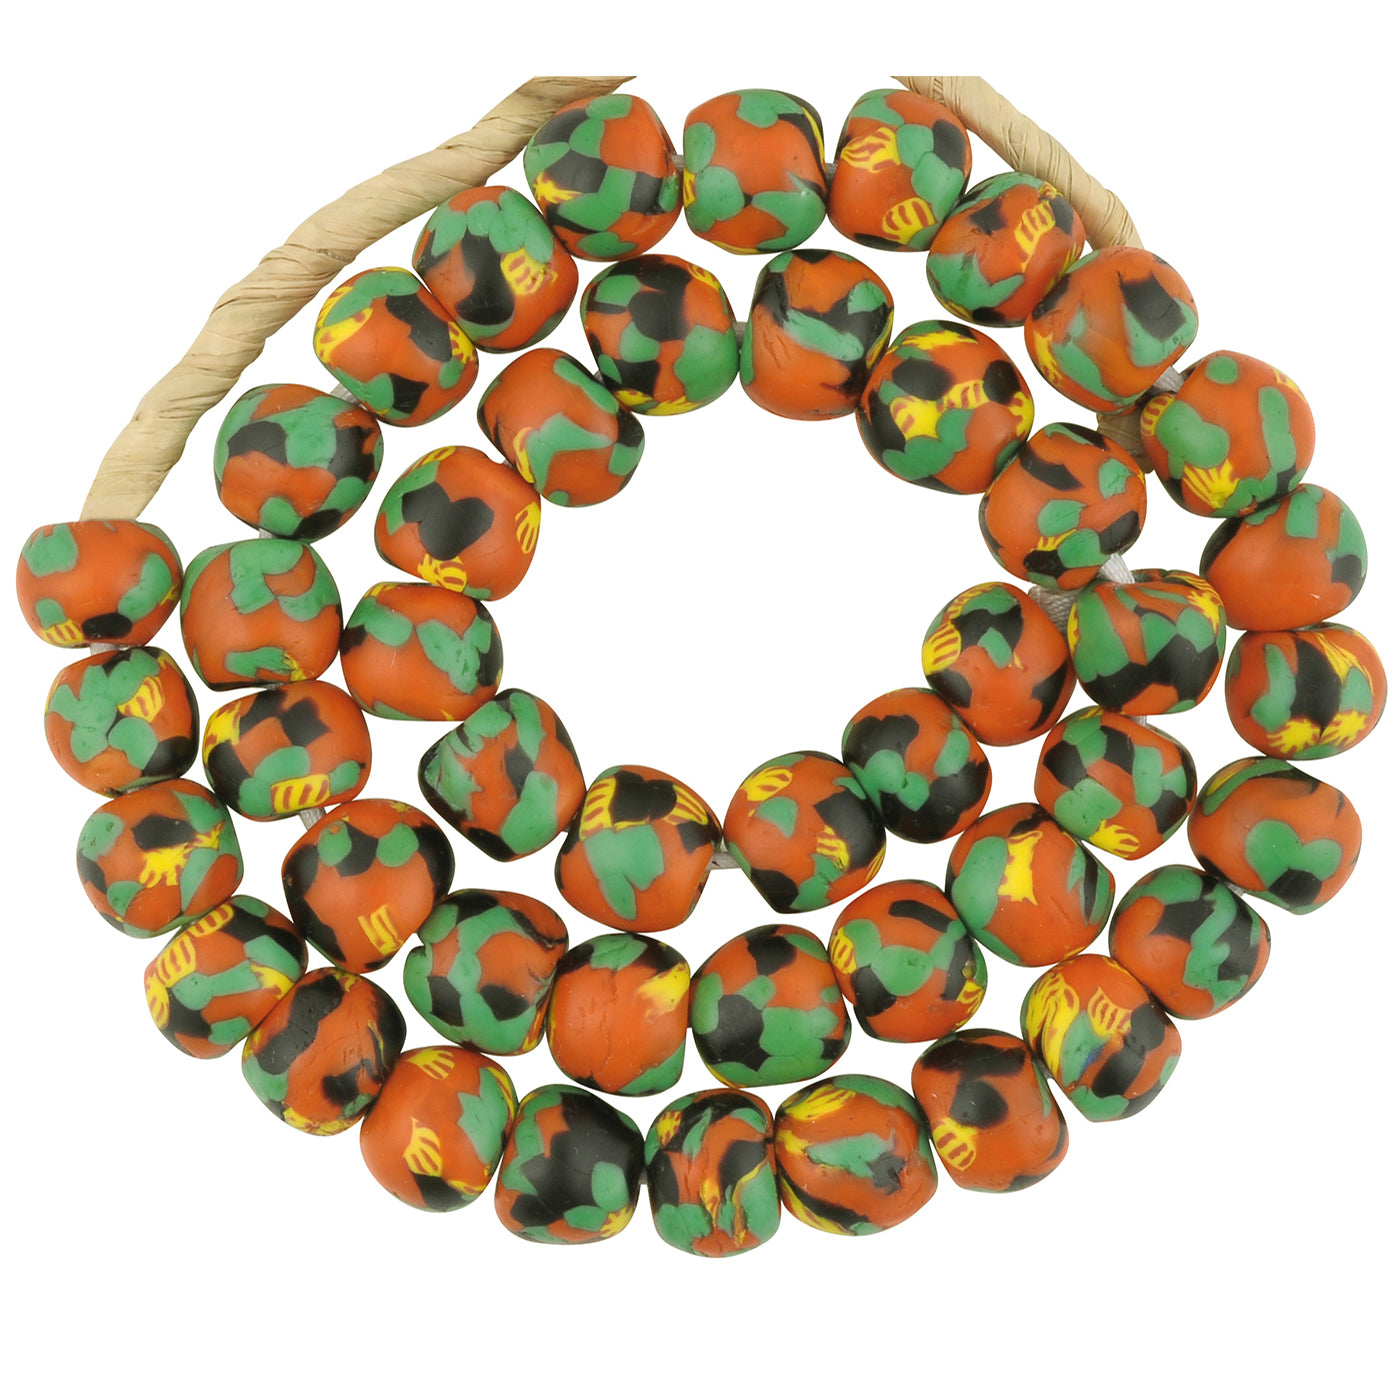 African recycled beads handmade Ghana necklace tumbled glass - Tribalgh